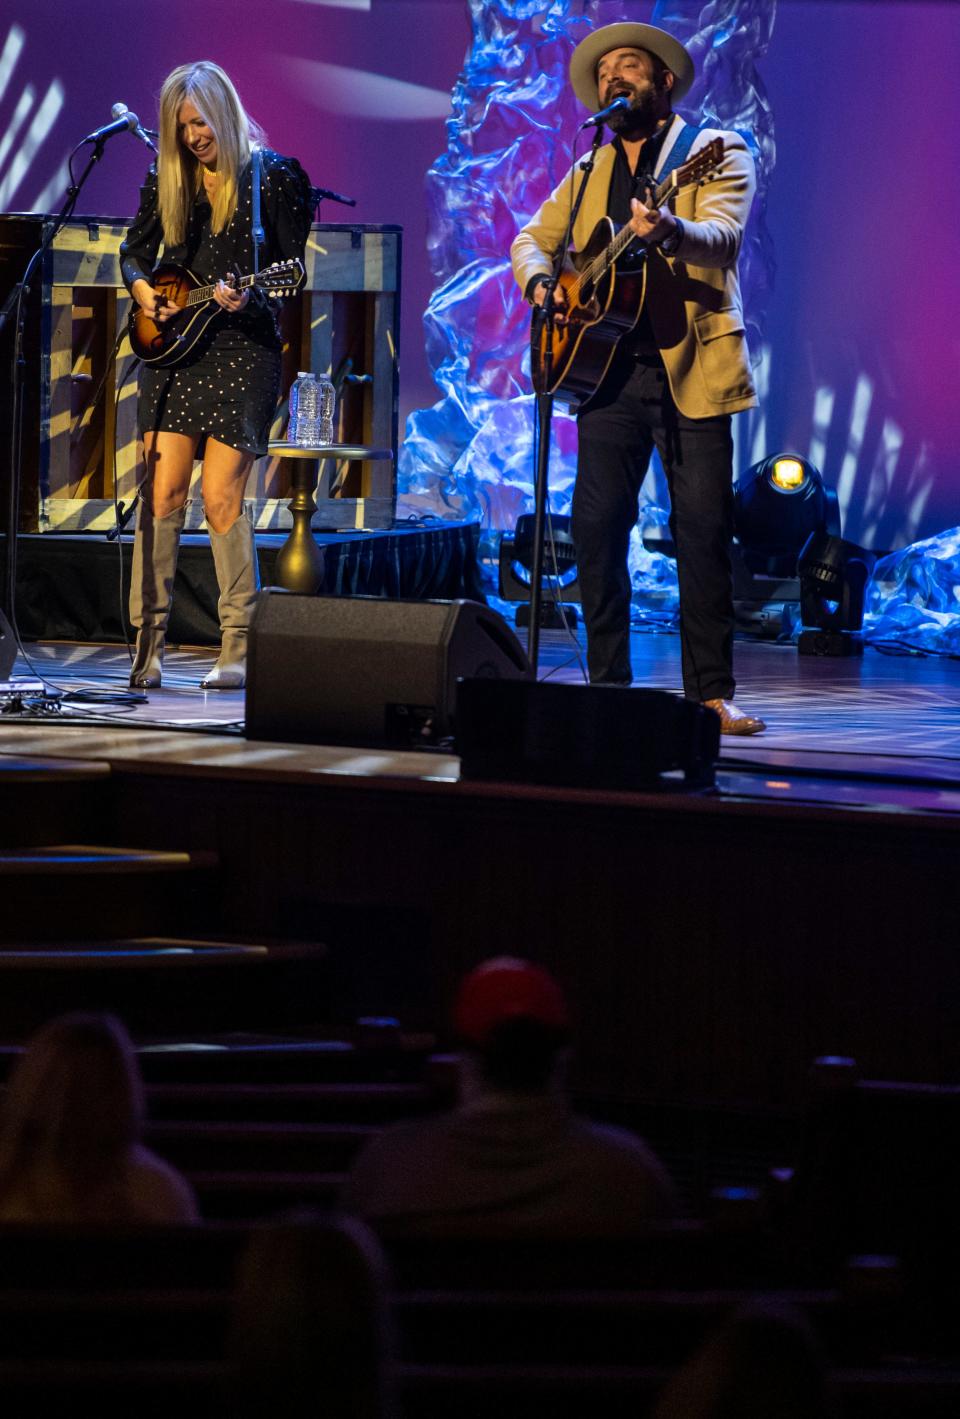 Drew and Ellie Holcomb’s Neighborly Christmas is set for Dec. 3 at the Orpheum.